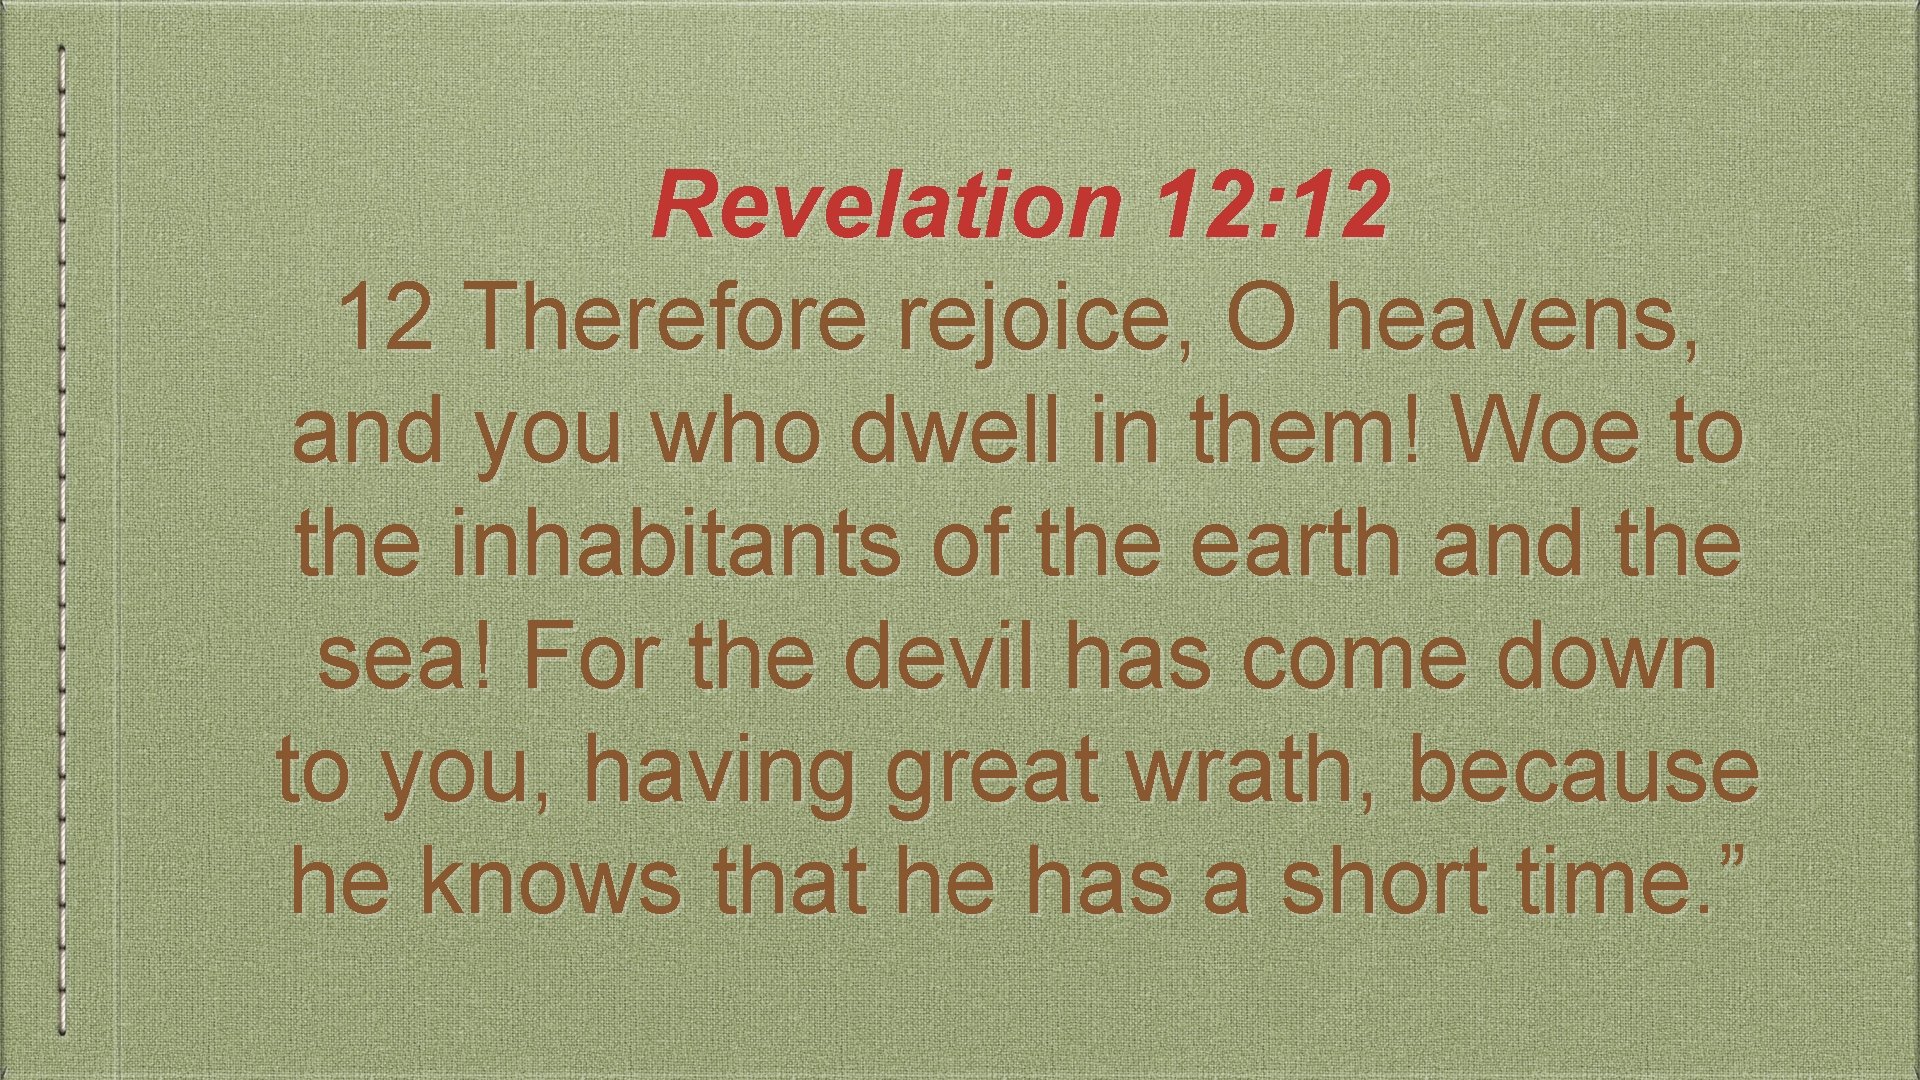 Revelation 12: 12 12 Therefore rejoice, O heavens, and you who dwell in them!